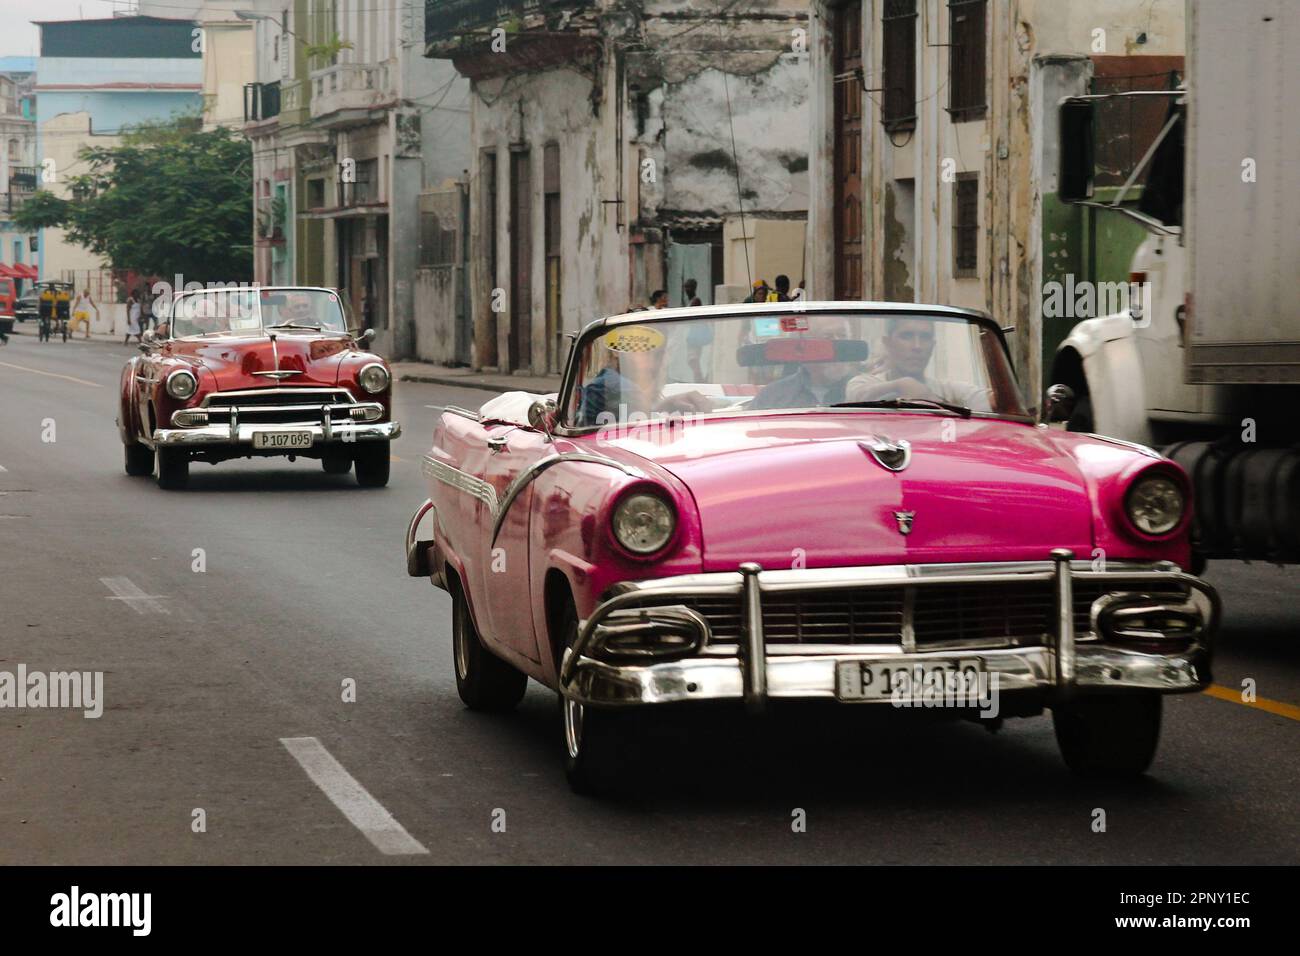 The classic cars driving down a street, lined with old-fashioned buildings Stock Photo